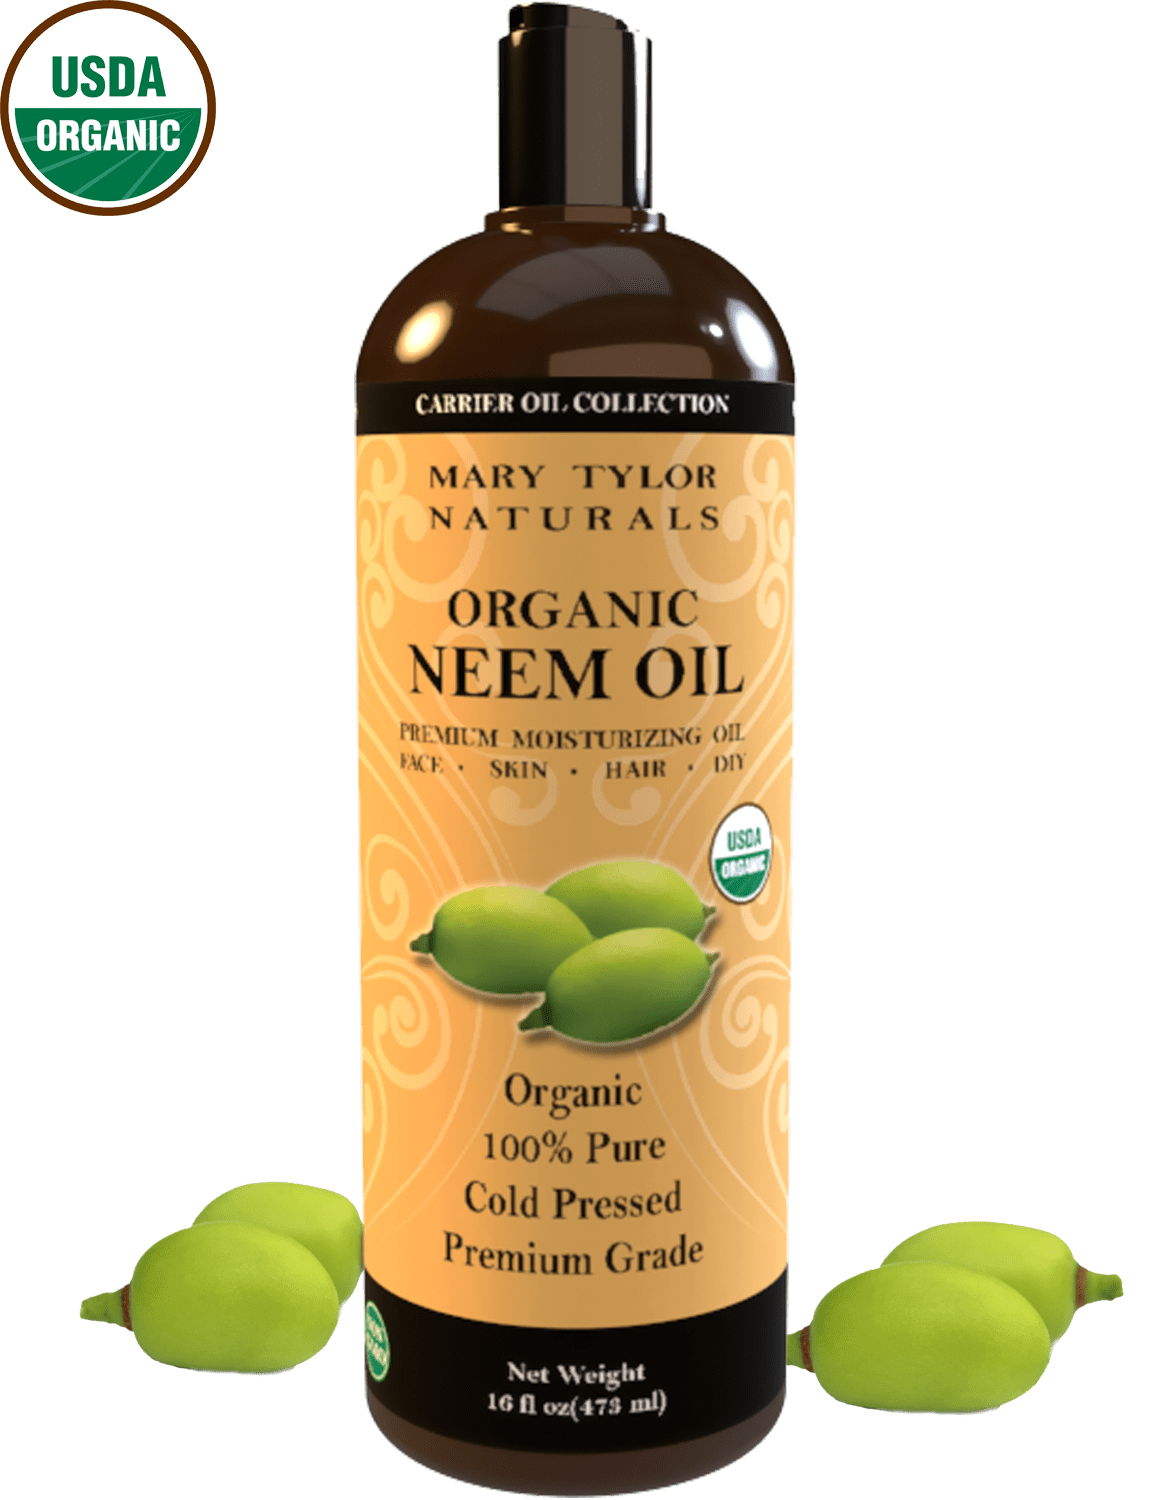 Organic Neem Oil 16 oz USDA Certified by Mary Tylor Naturals, Premium  Therapeutic Grade, 100% Pure 